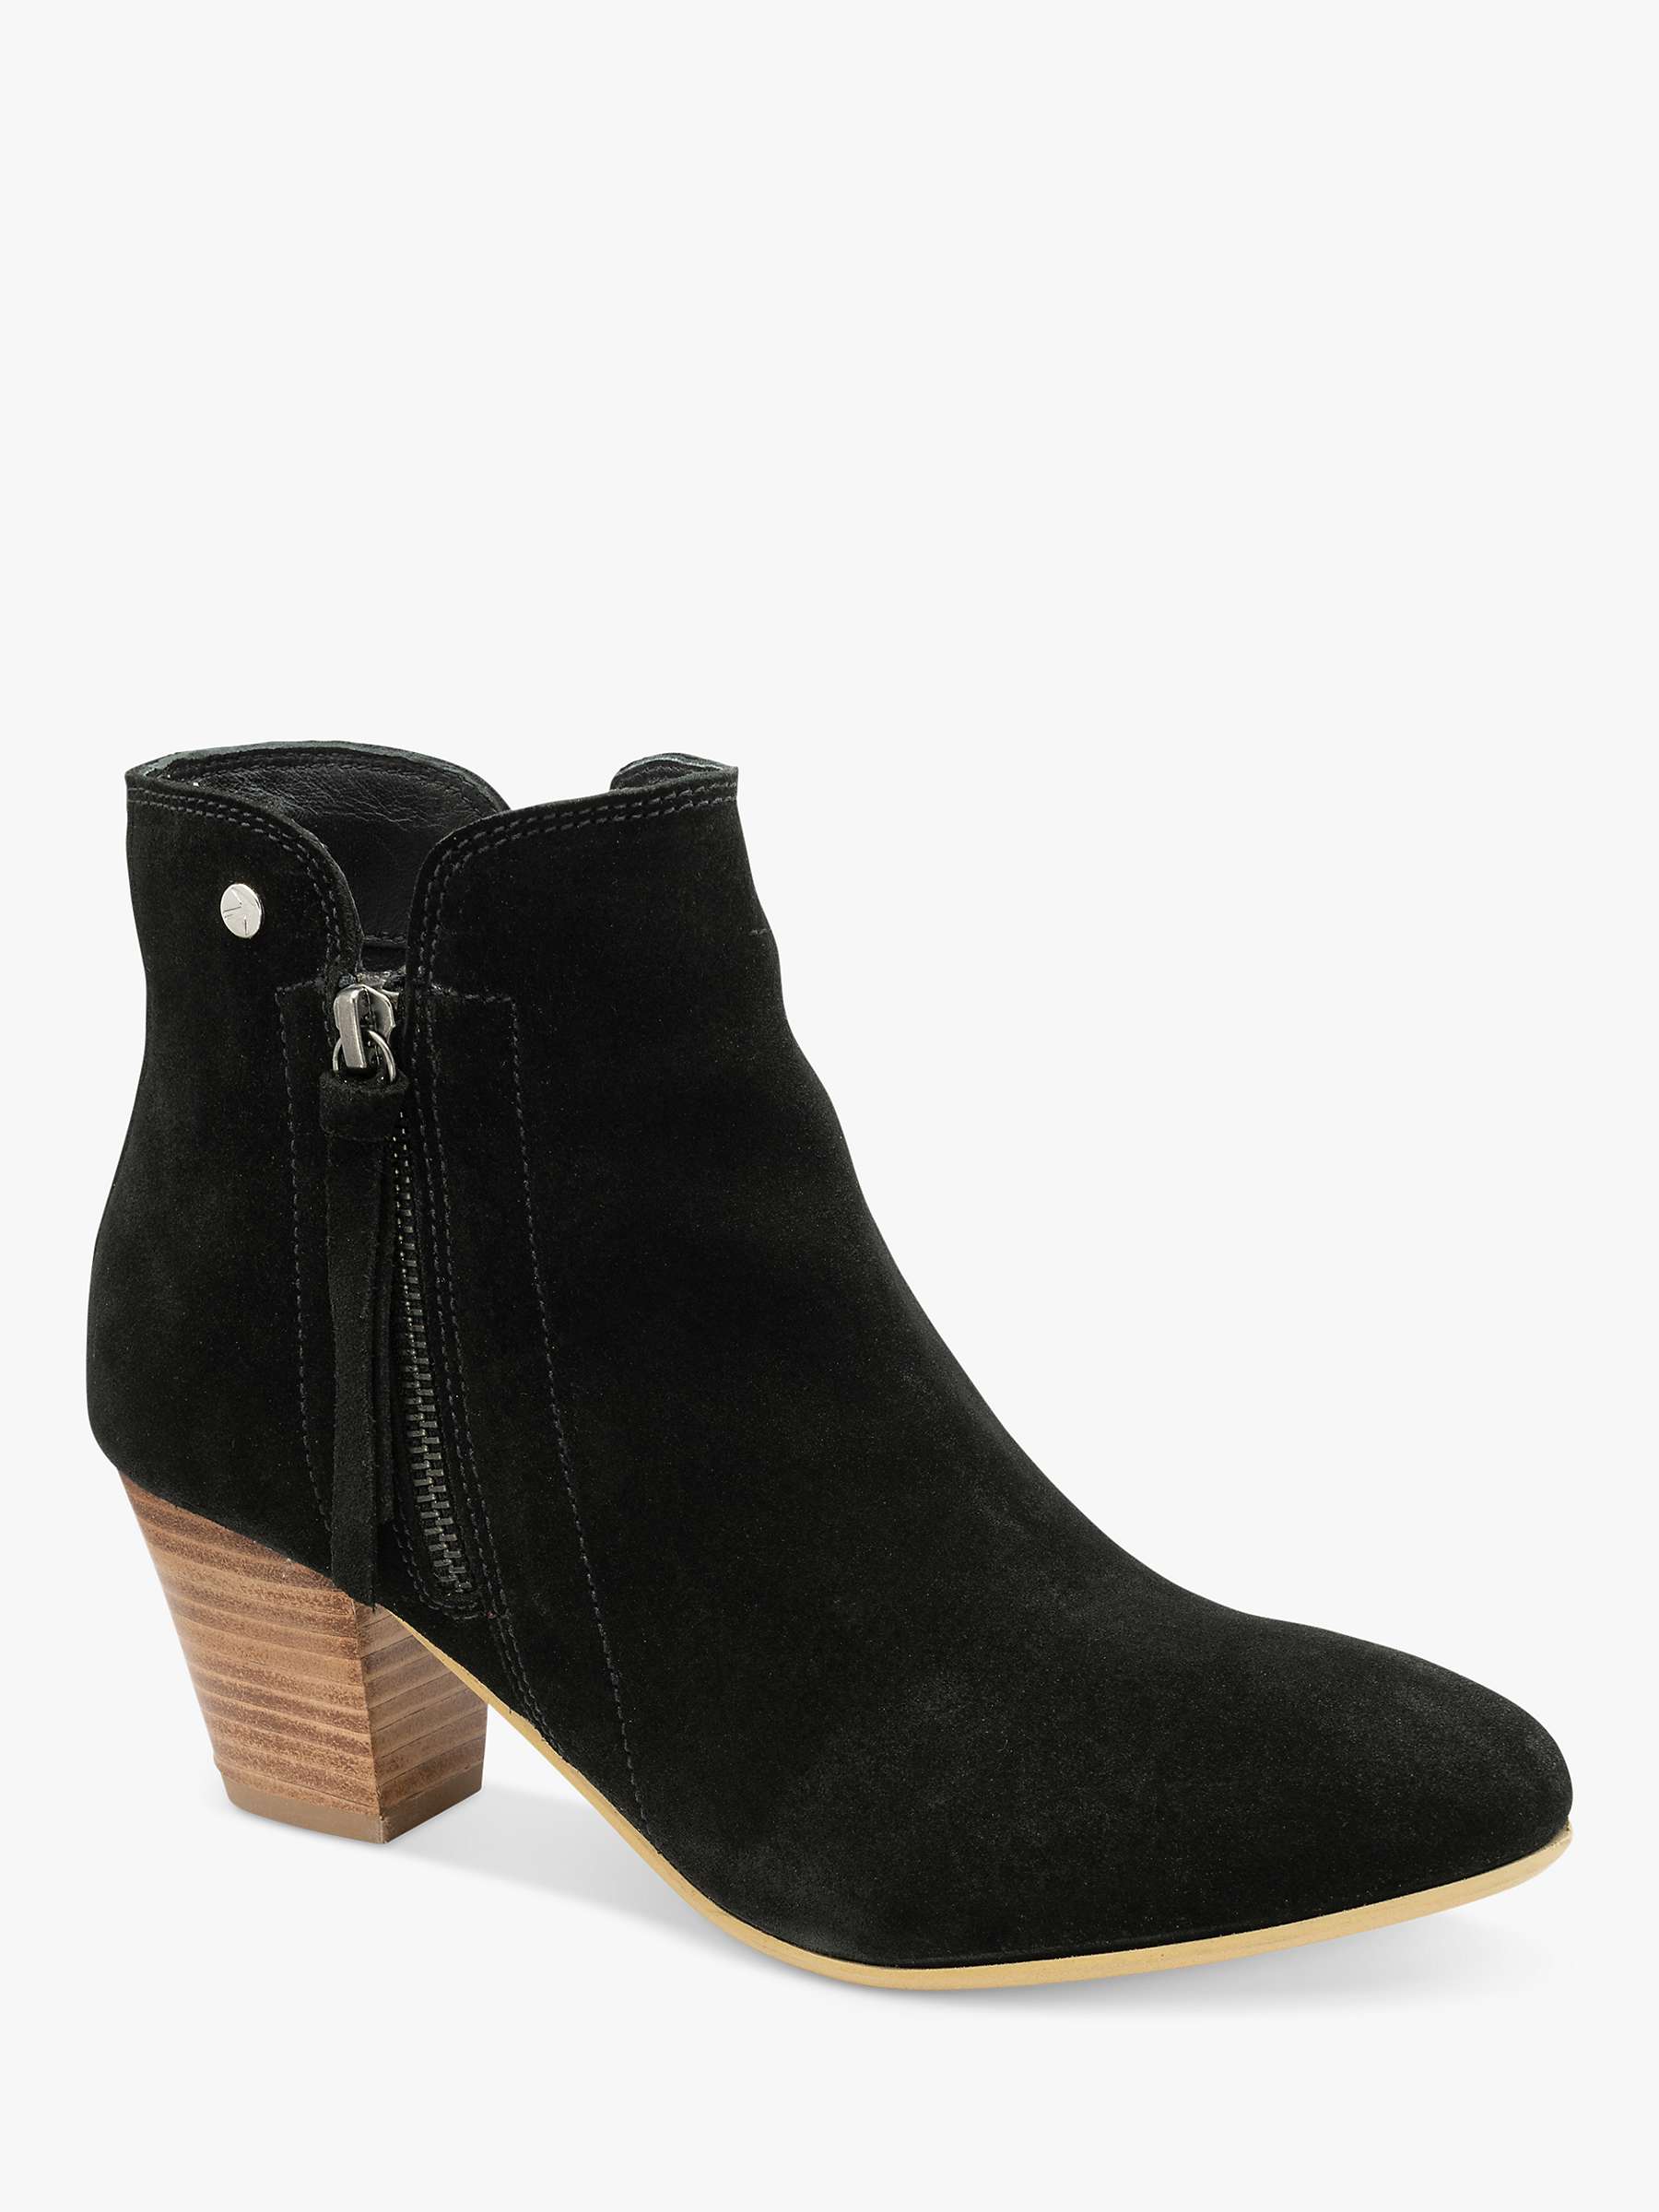 Buy Ravel Tulli Suede Ankle Boots Online at johnlewis.com